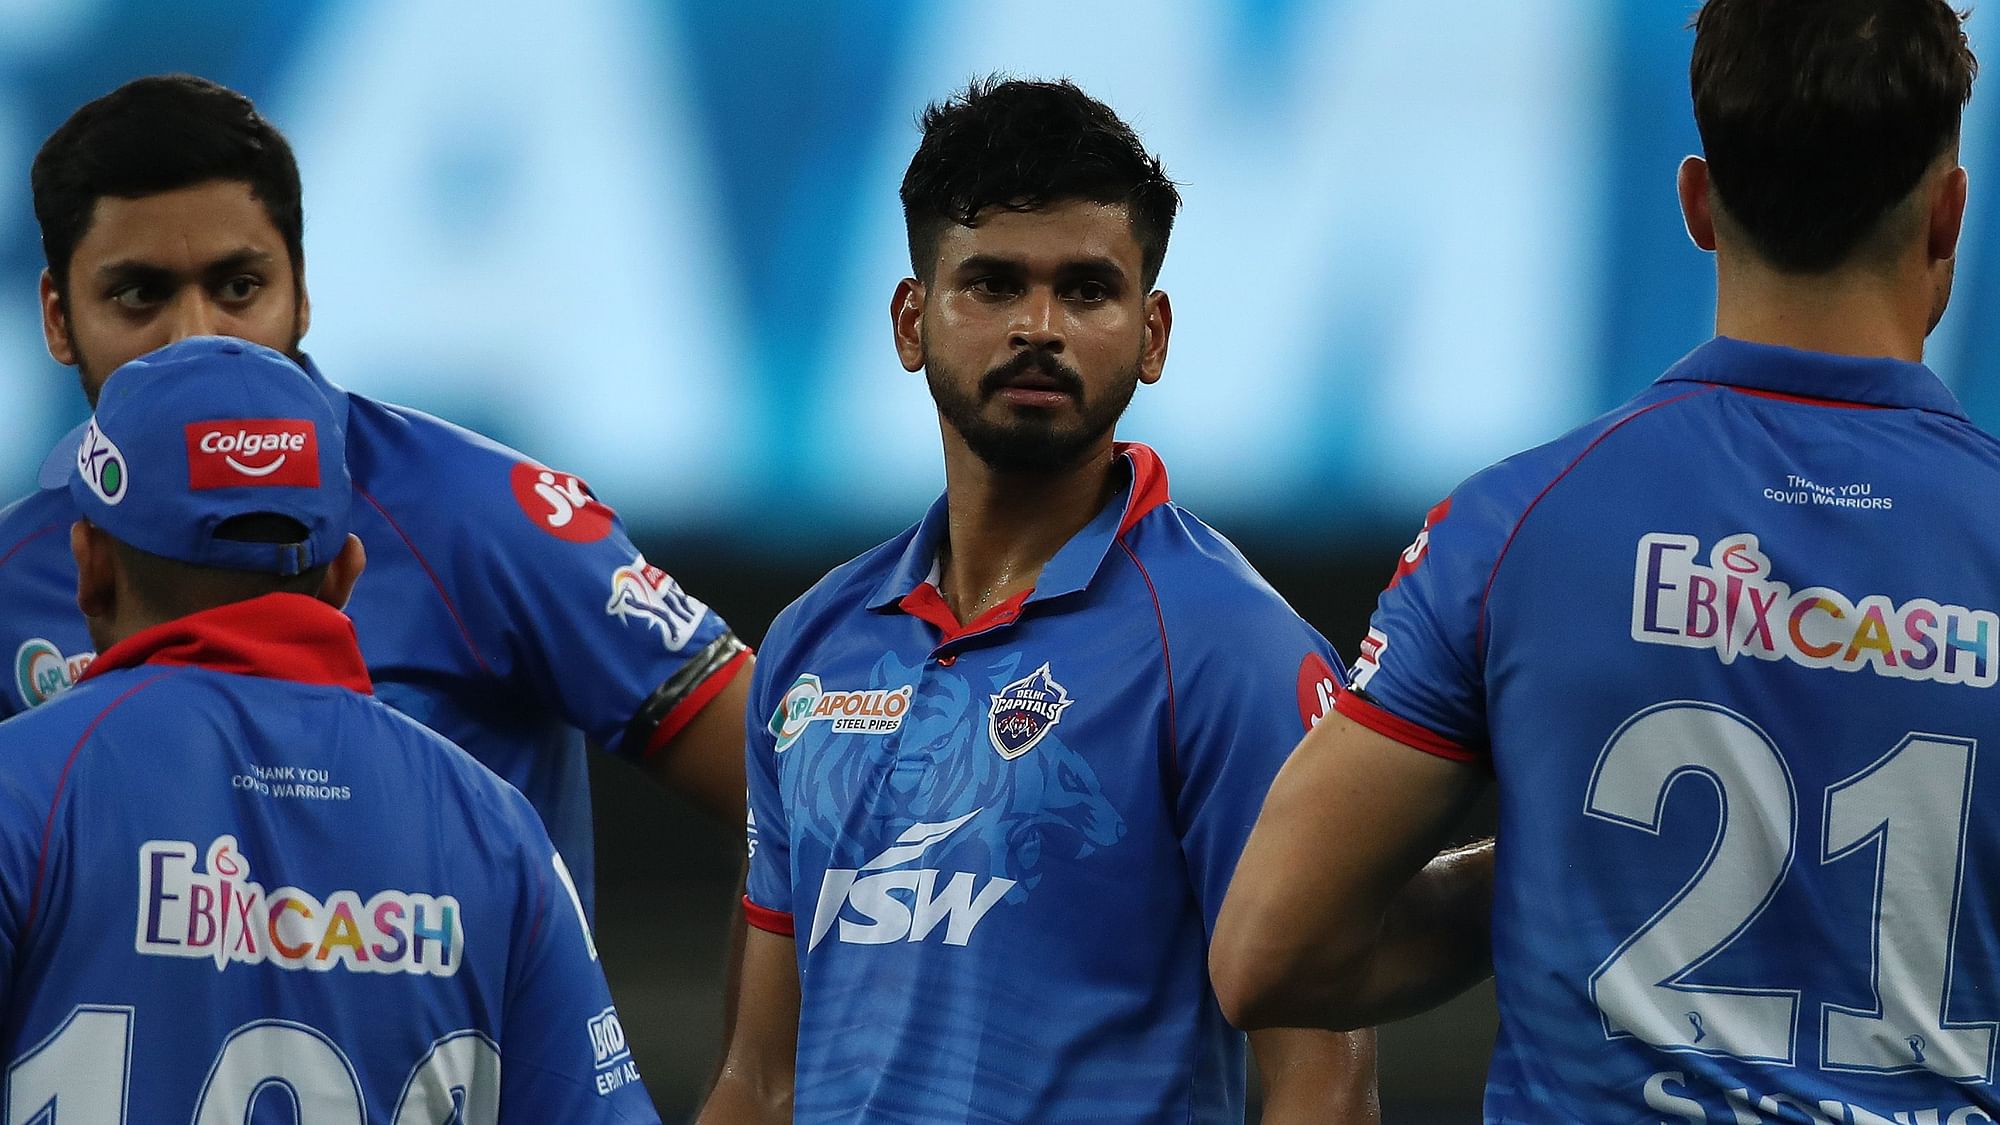 Shreyas Iyer, captain of the Delhi Capitals, has been fined Rs 12 lakh for maintaining slow over-rate during his side’s 15-run loss against Sunrisers Hyderabad (SRH).